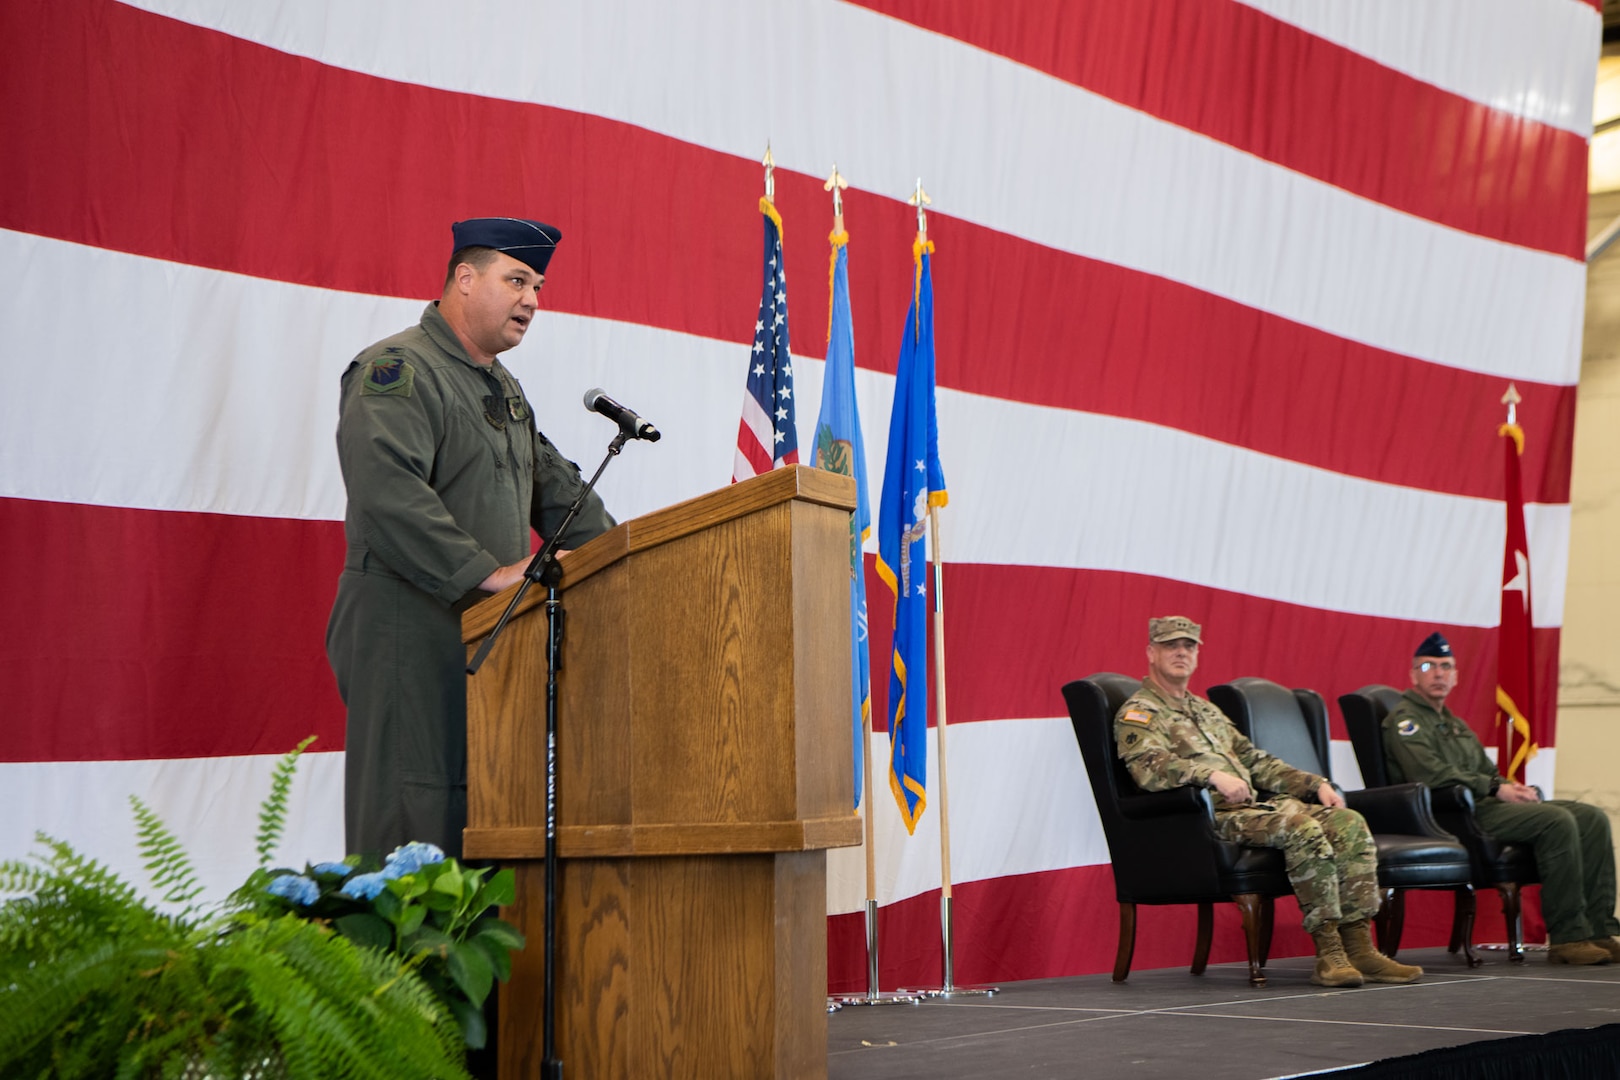 a man speaks from behind a podium that is set in front of an American flag